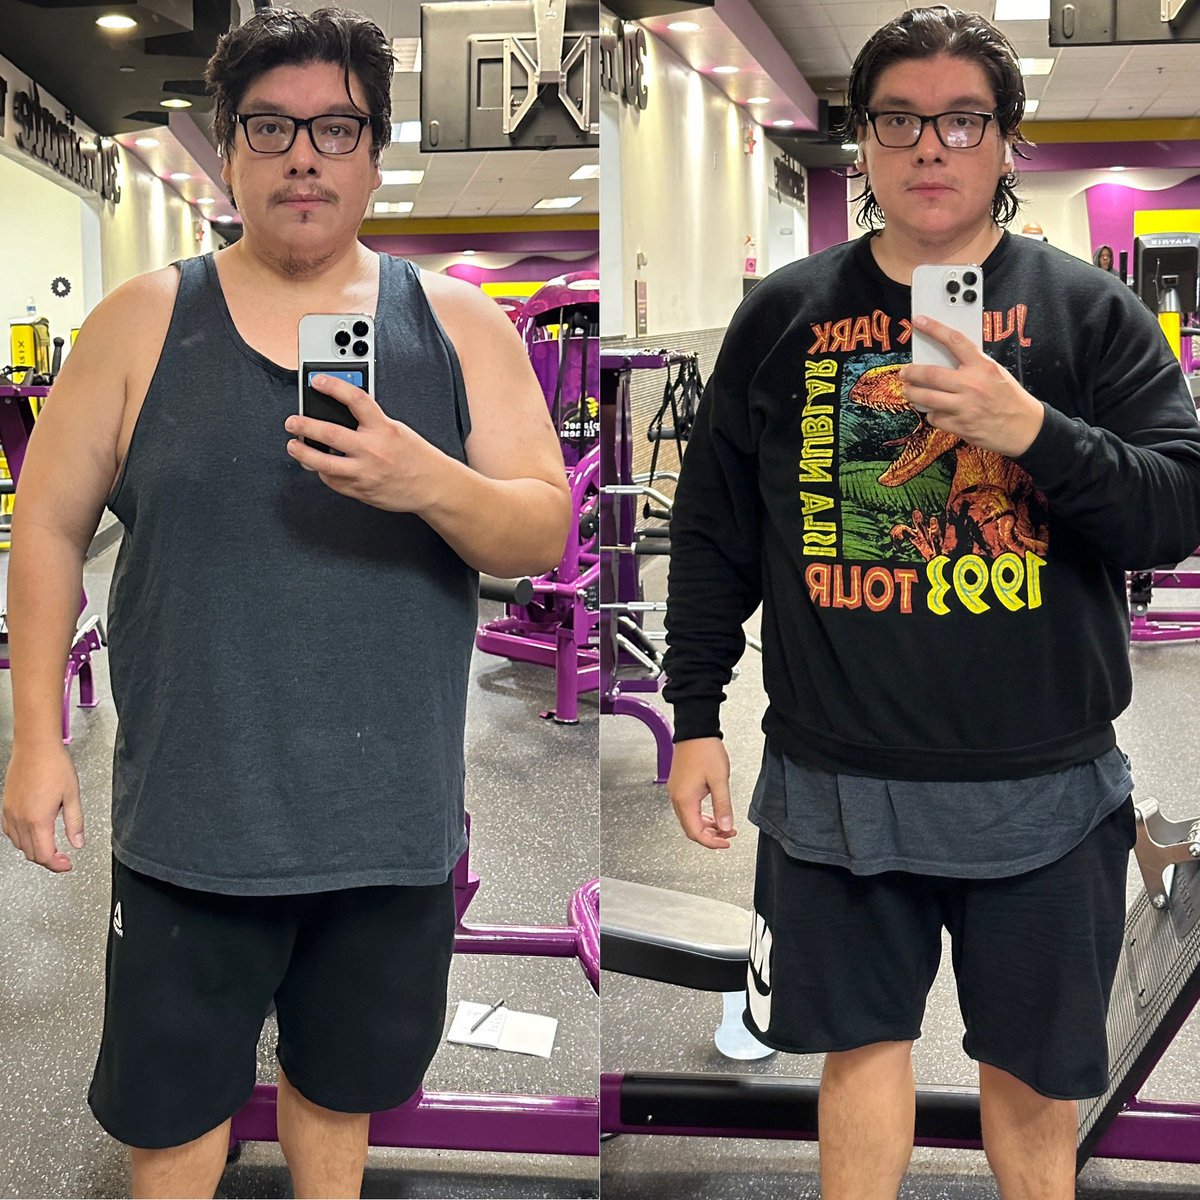 From Jan 3rd to today may 9th, I have lost a total of 50lbs. I have 60lbs more to lose to reach my goal weight. 

#weightlifting #weightlosstransformation #fitnessmotivation #newjersey